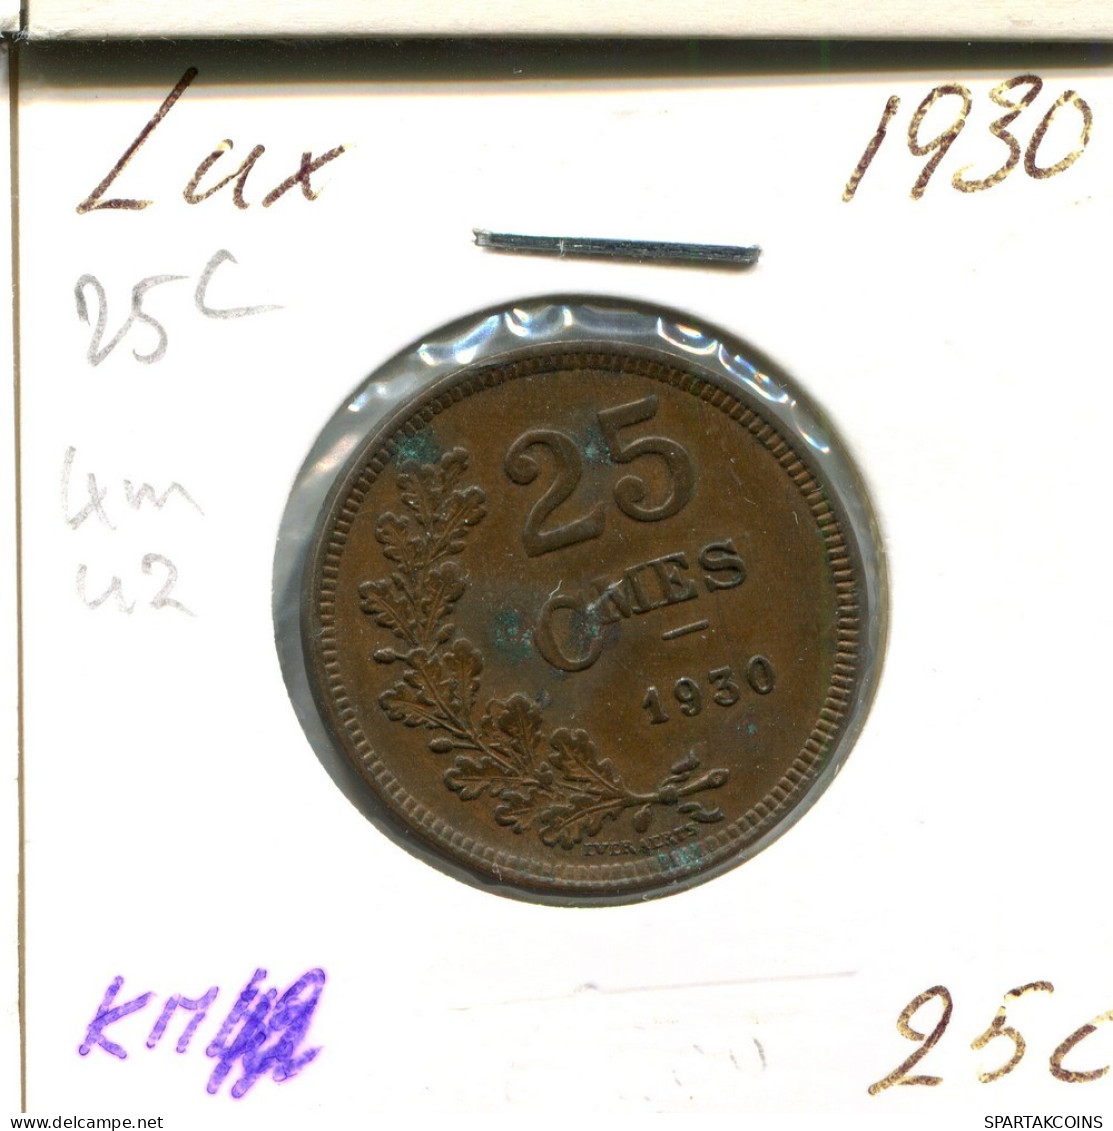 25 CENTIMES 1930 LUXEMBOURG Coin #AT189.U.A - Luxembourg